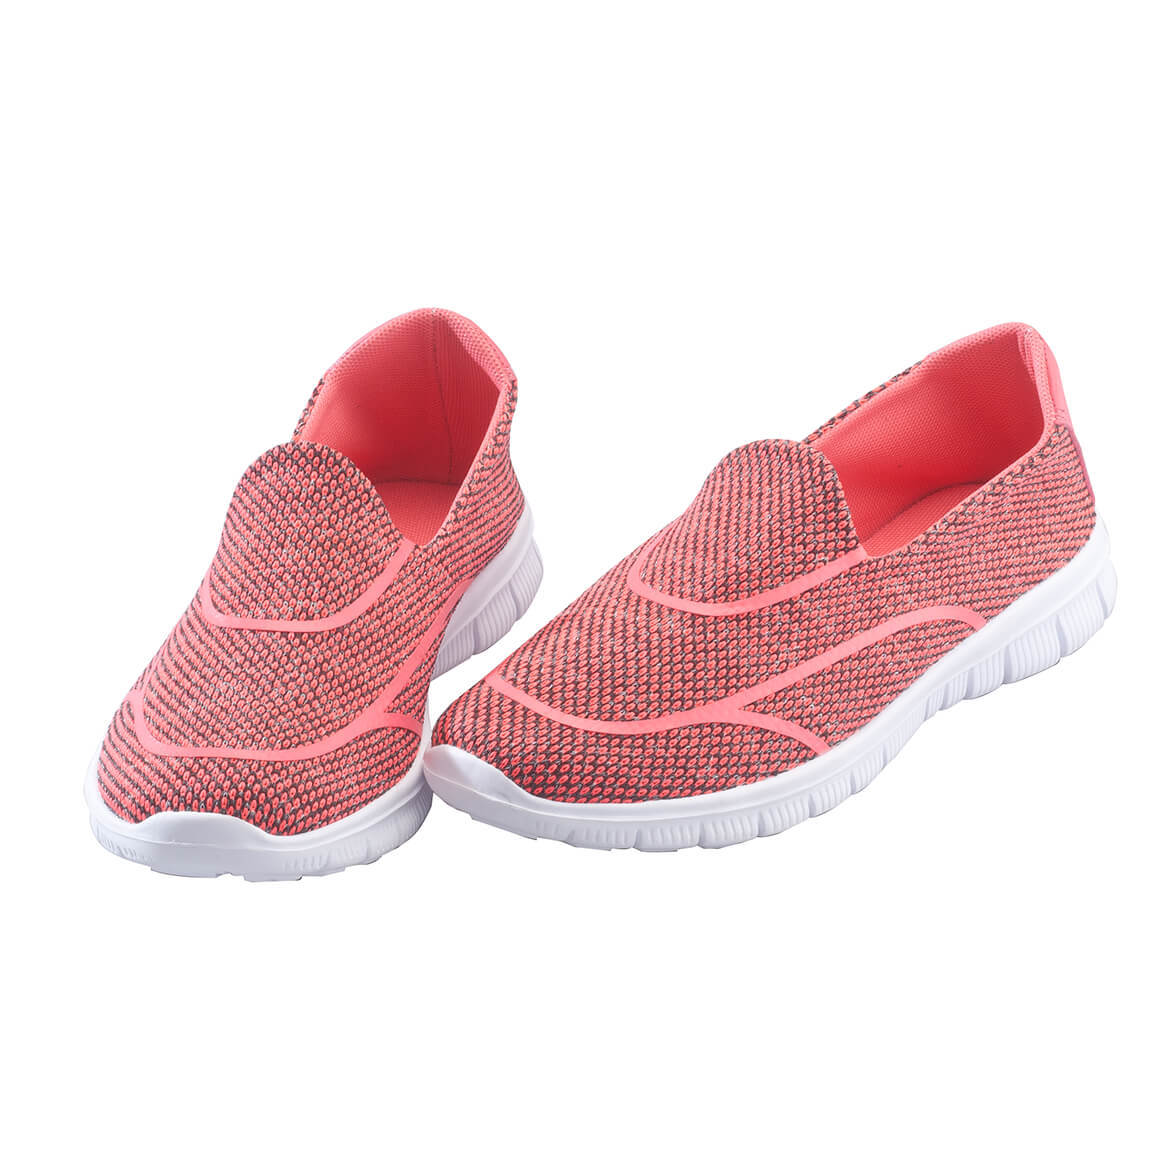 Silver Steps Feather Lite Walking Shoe-Coral-10 - image 1 of 1